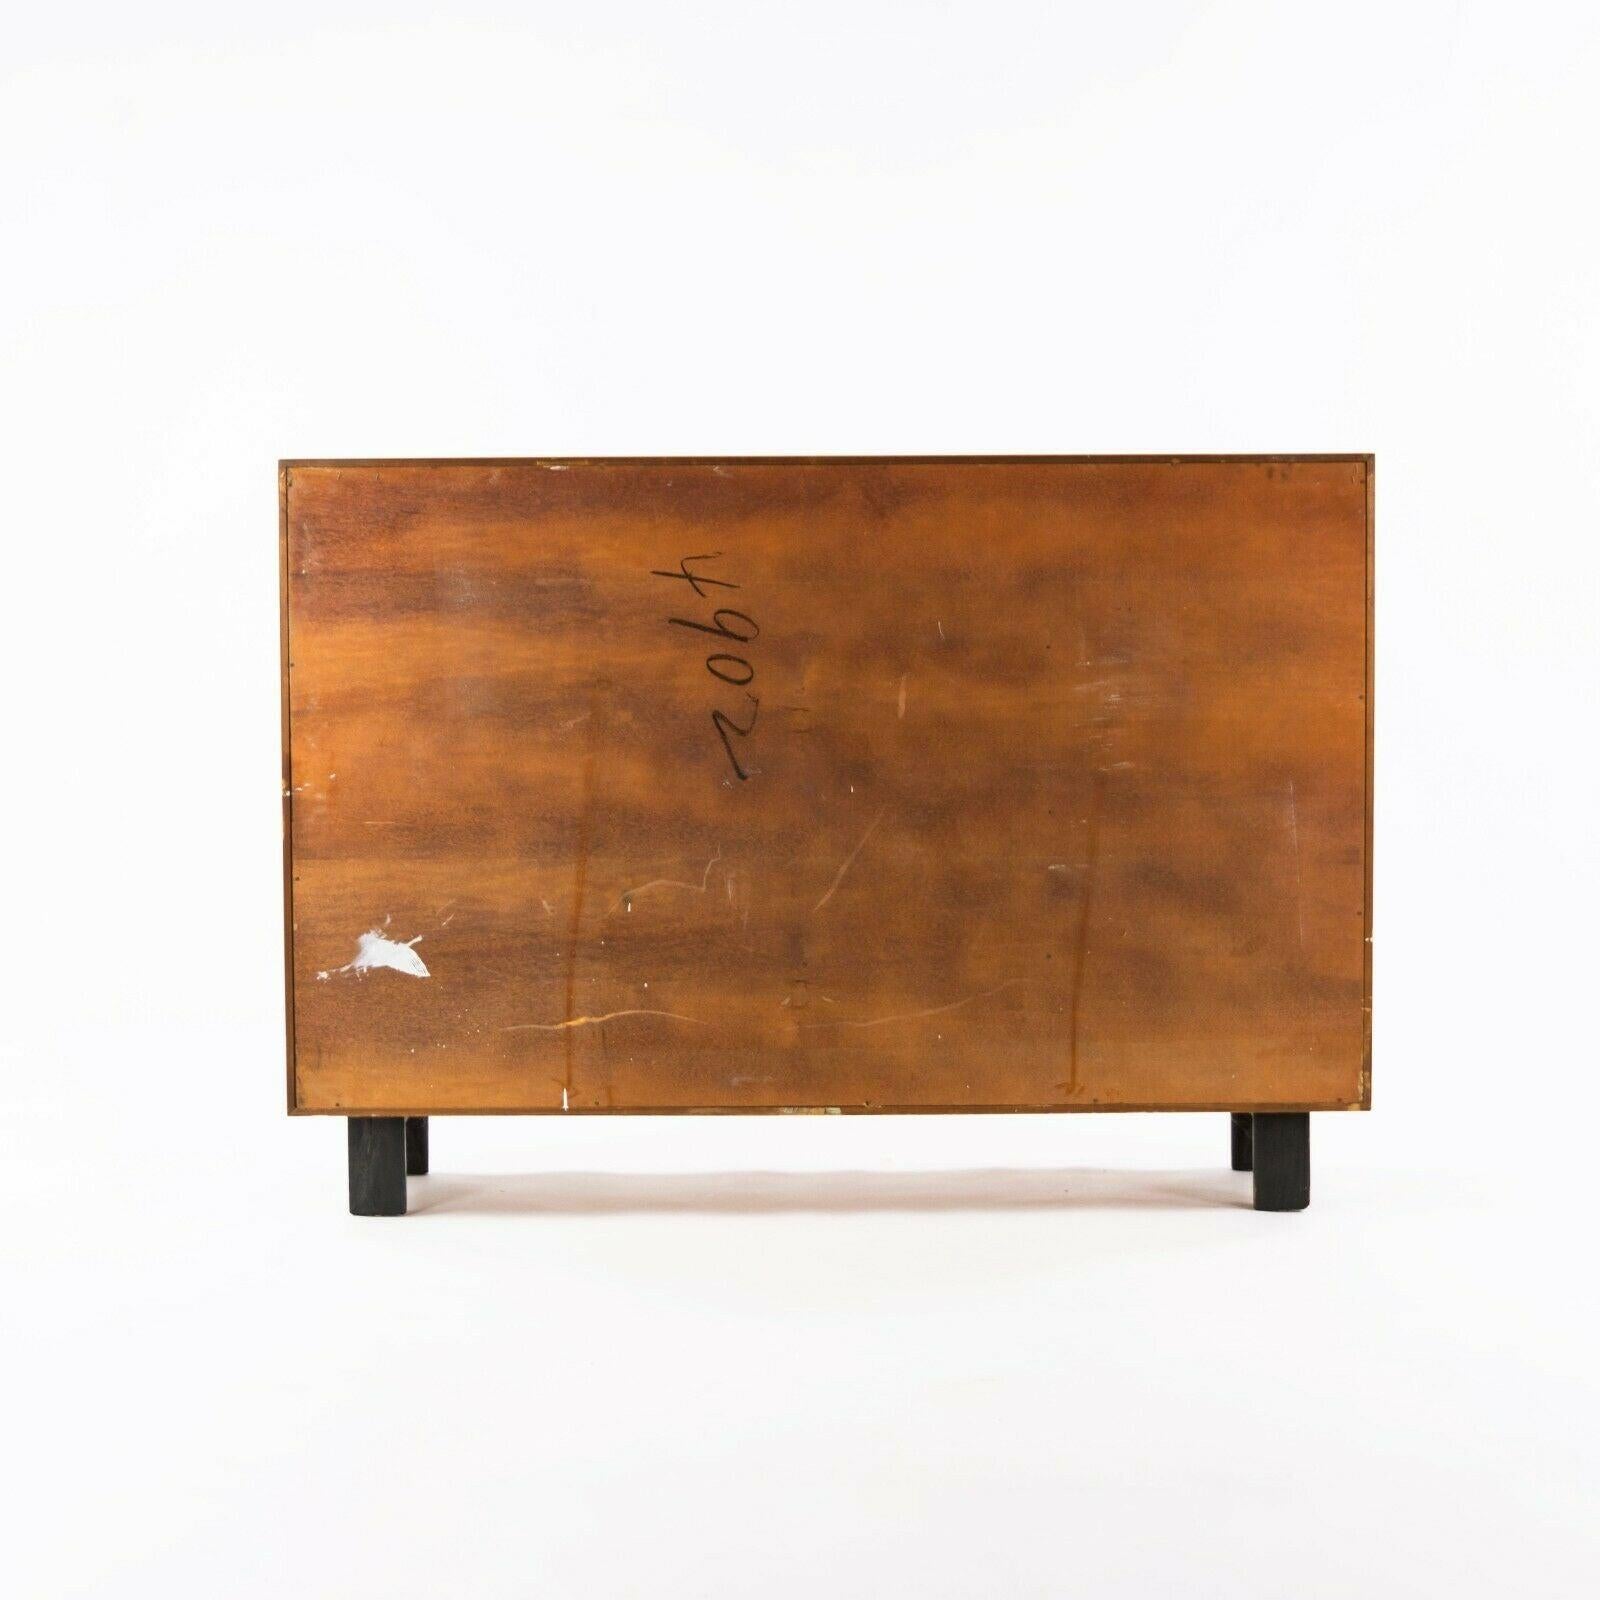 1954 George Nelson Herman Miller Basic Cabinet Series 4936 Credenza / Dresser In Good Condition For Sale In Philadelphia, PA